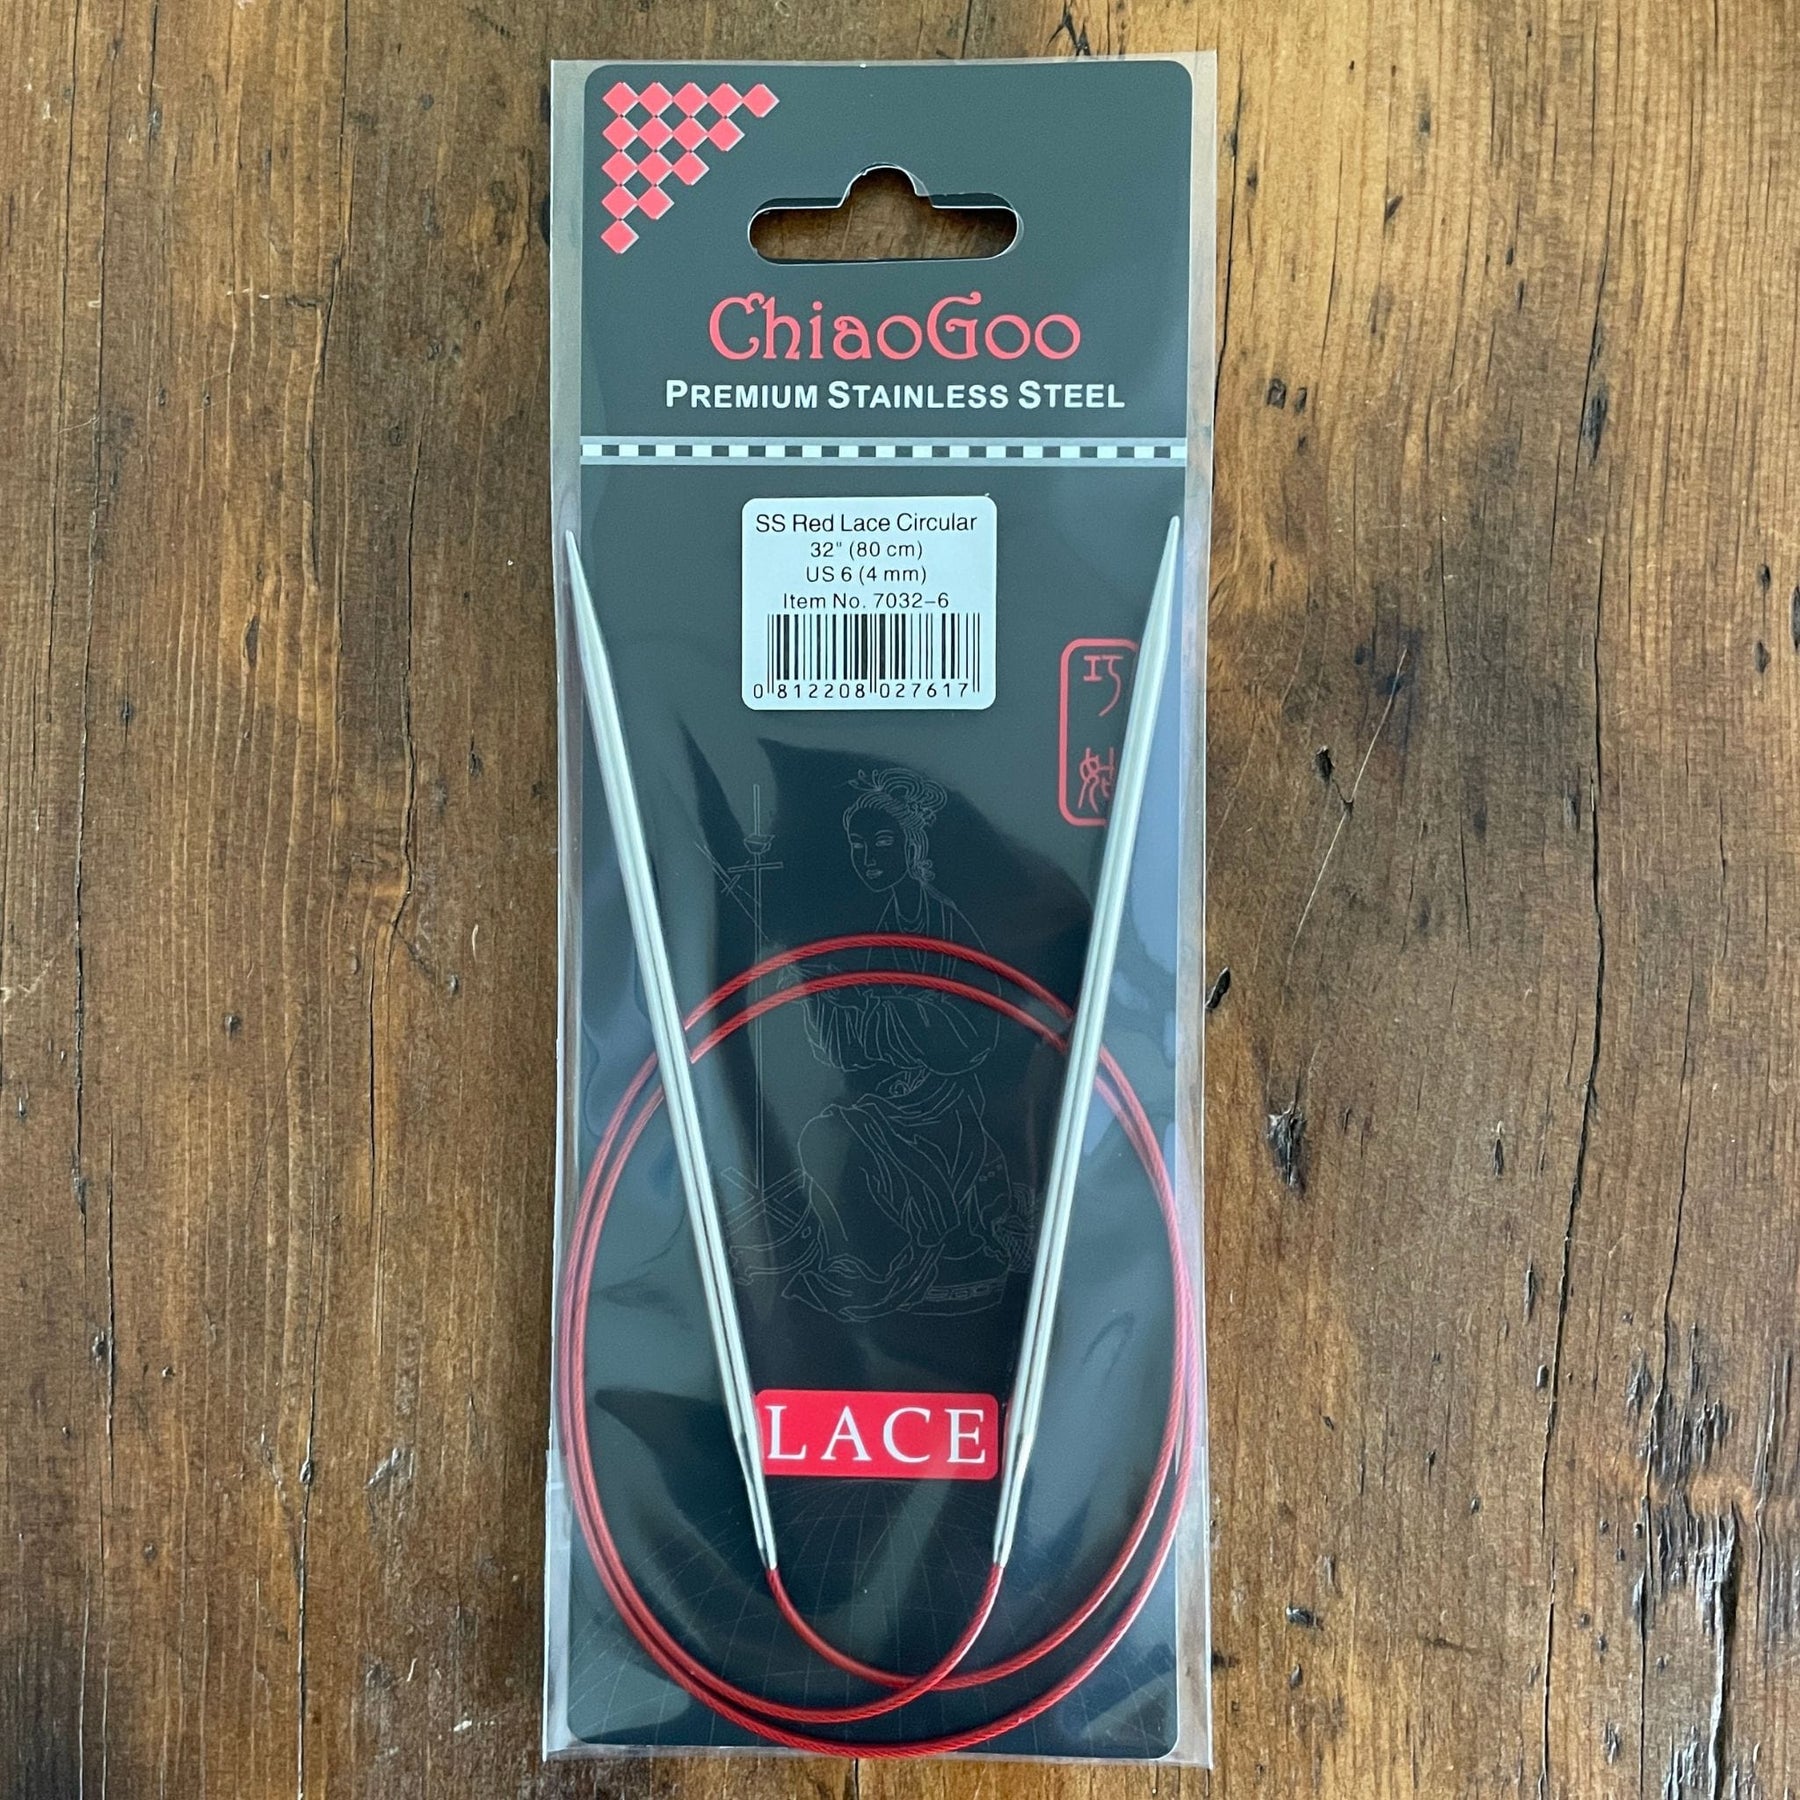 Chiaogoo Red Lace Circular Needles 32 Inches